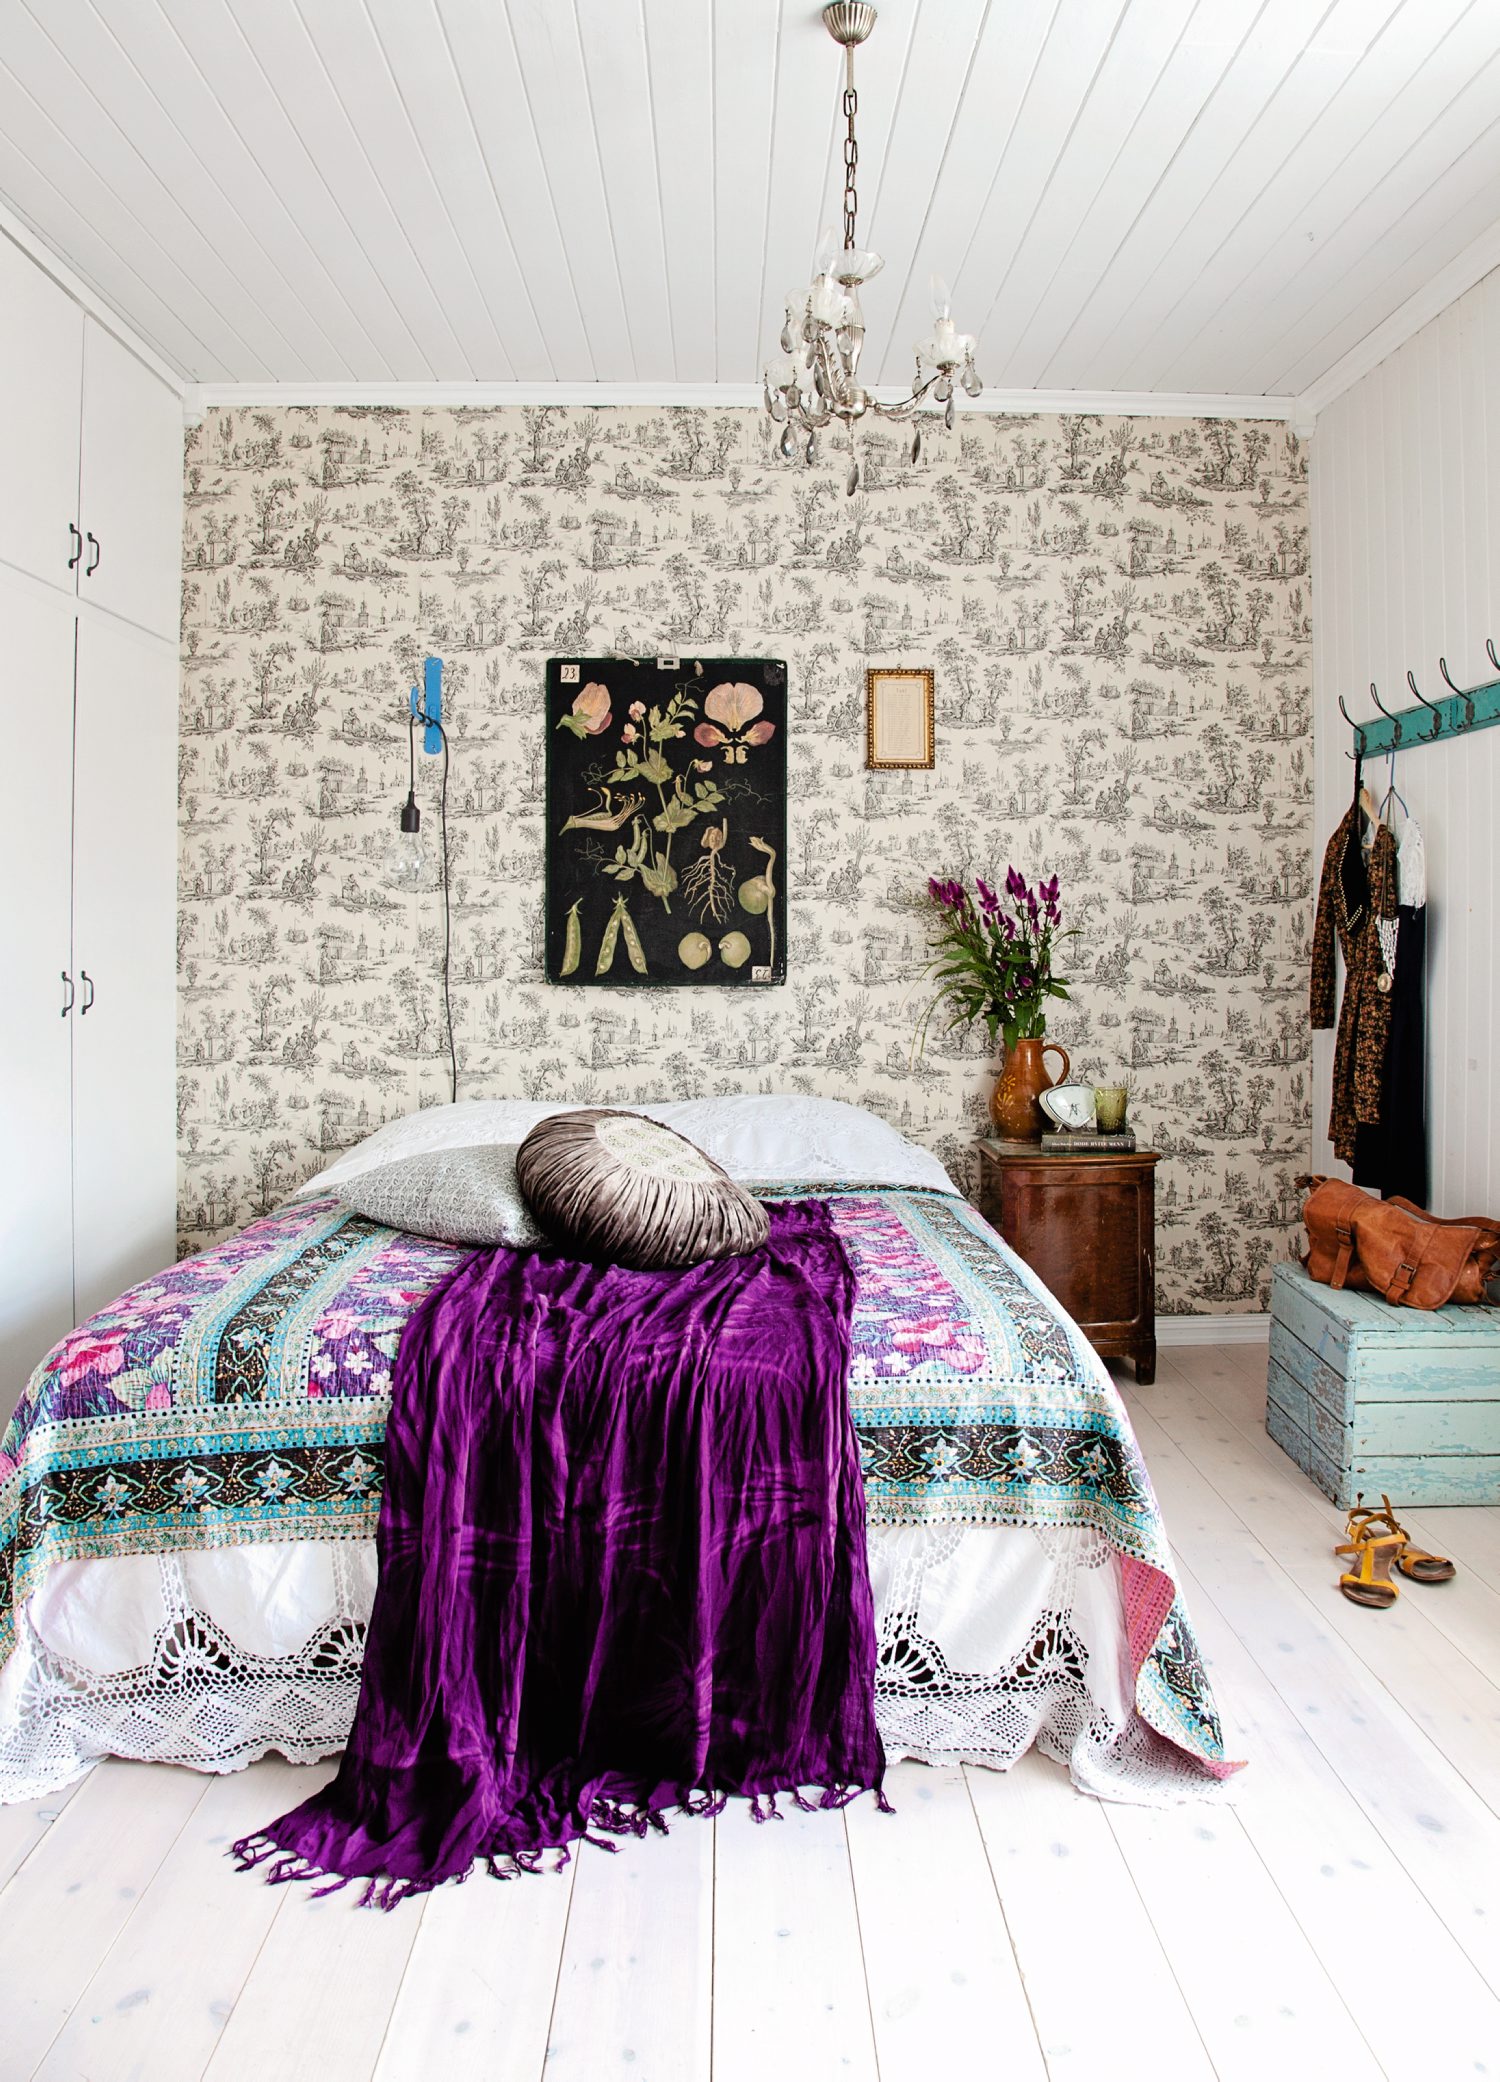 Boho Room Tumblr With Patterned Wallpaper And Rustic - Rustic Bohemian Bedroom - HD Wallpaper 